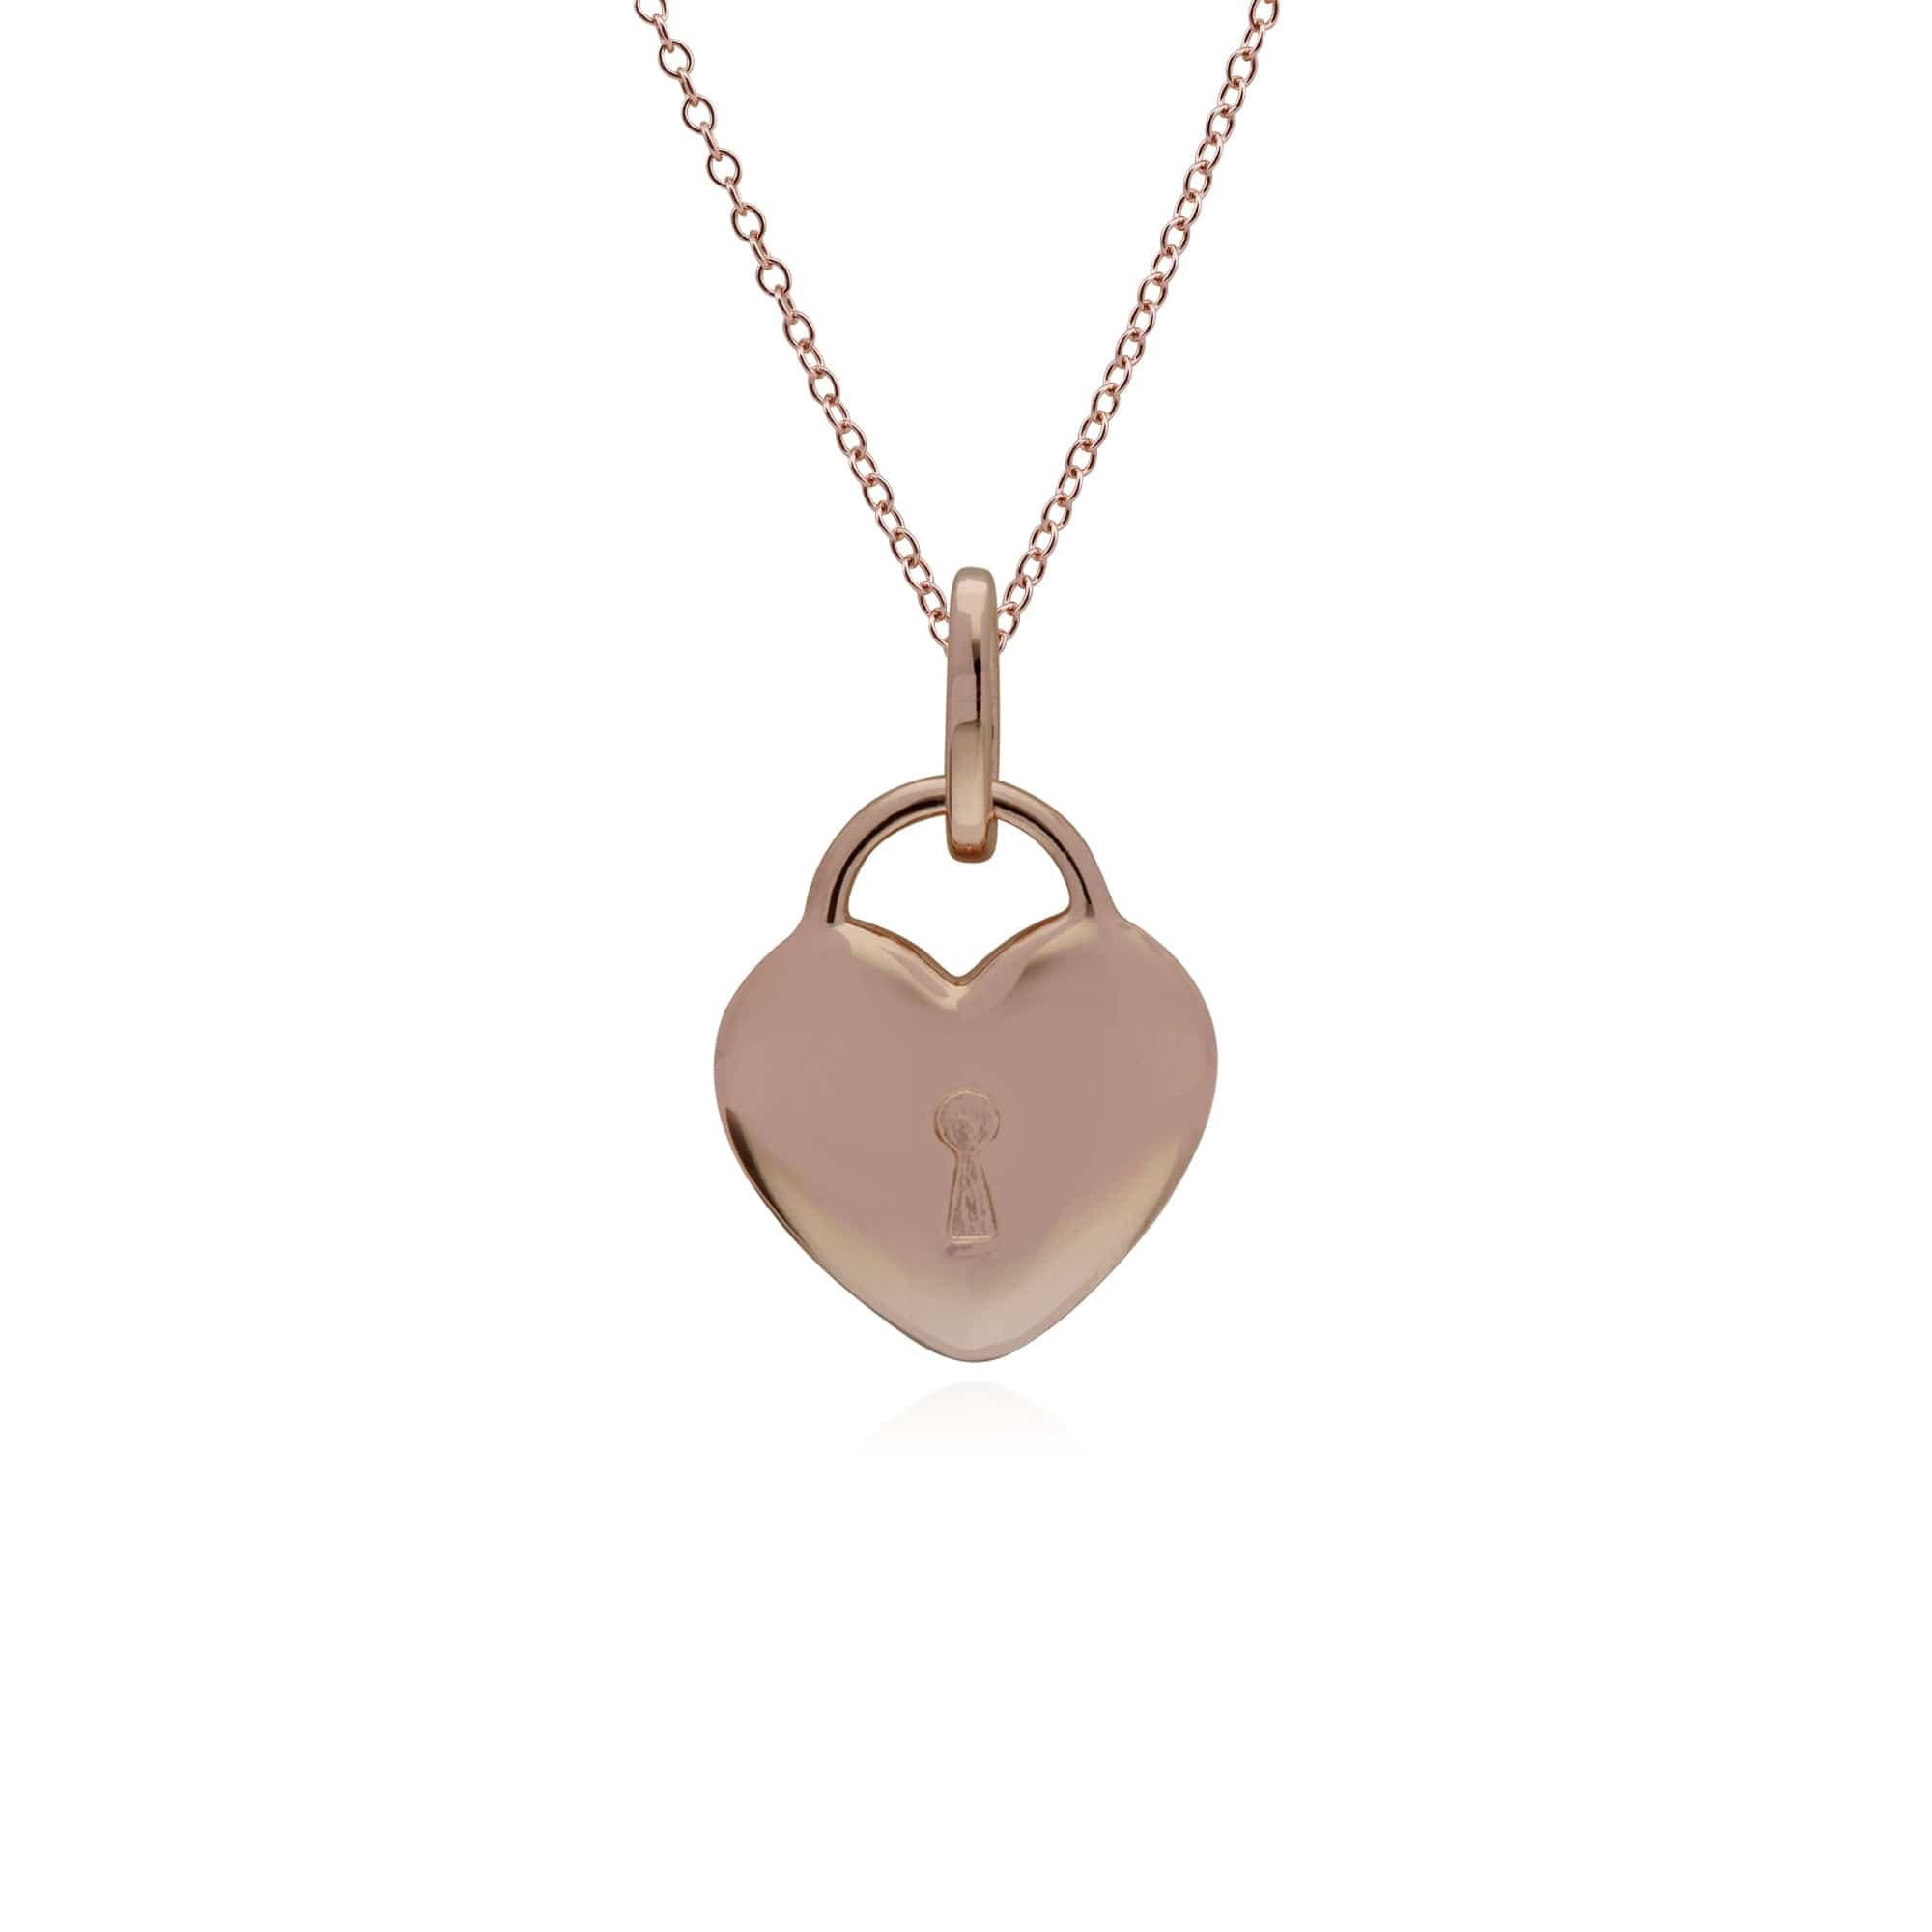 270P027308925-270P026901925 Classic Heart Lock Pendant & Clear Topaz Charm in Rose Gold Plated 925 Sterling Silver 3